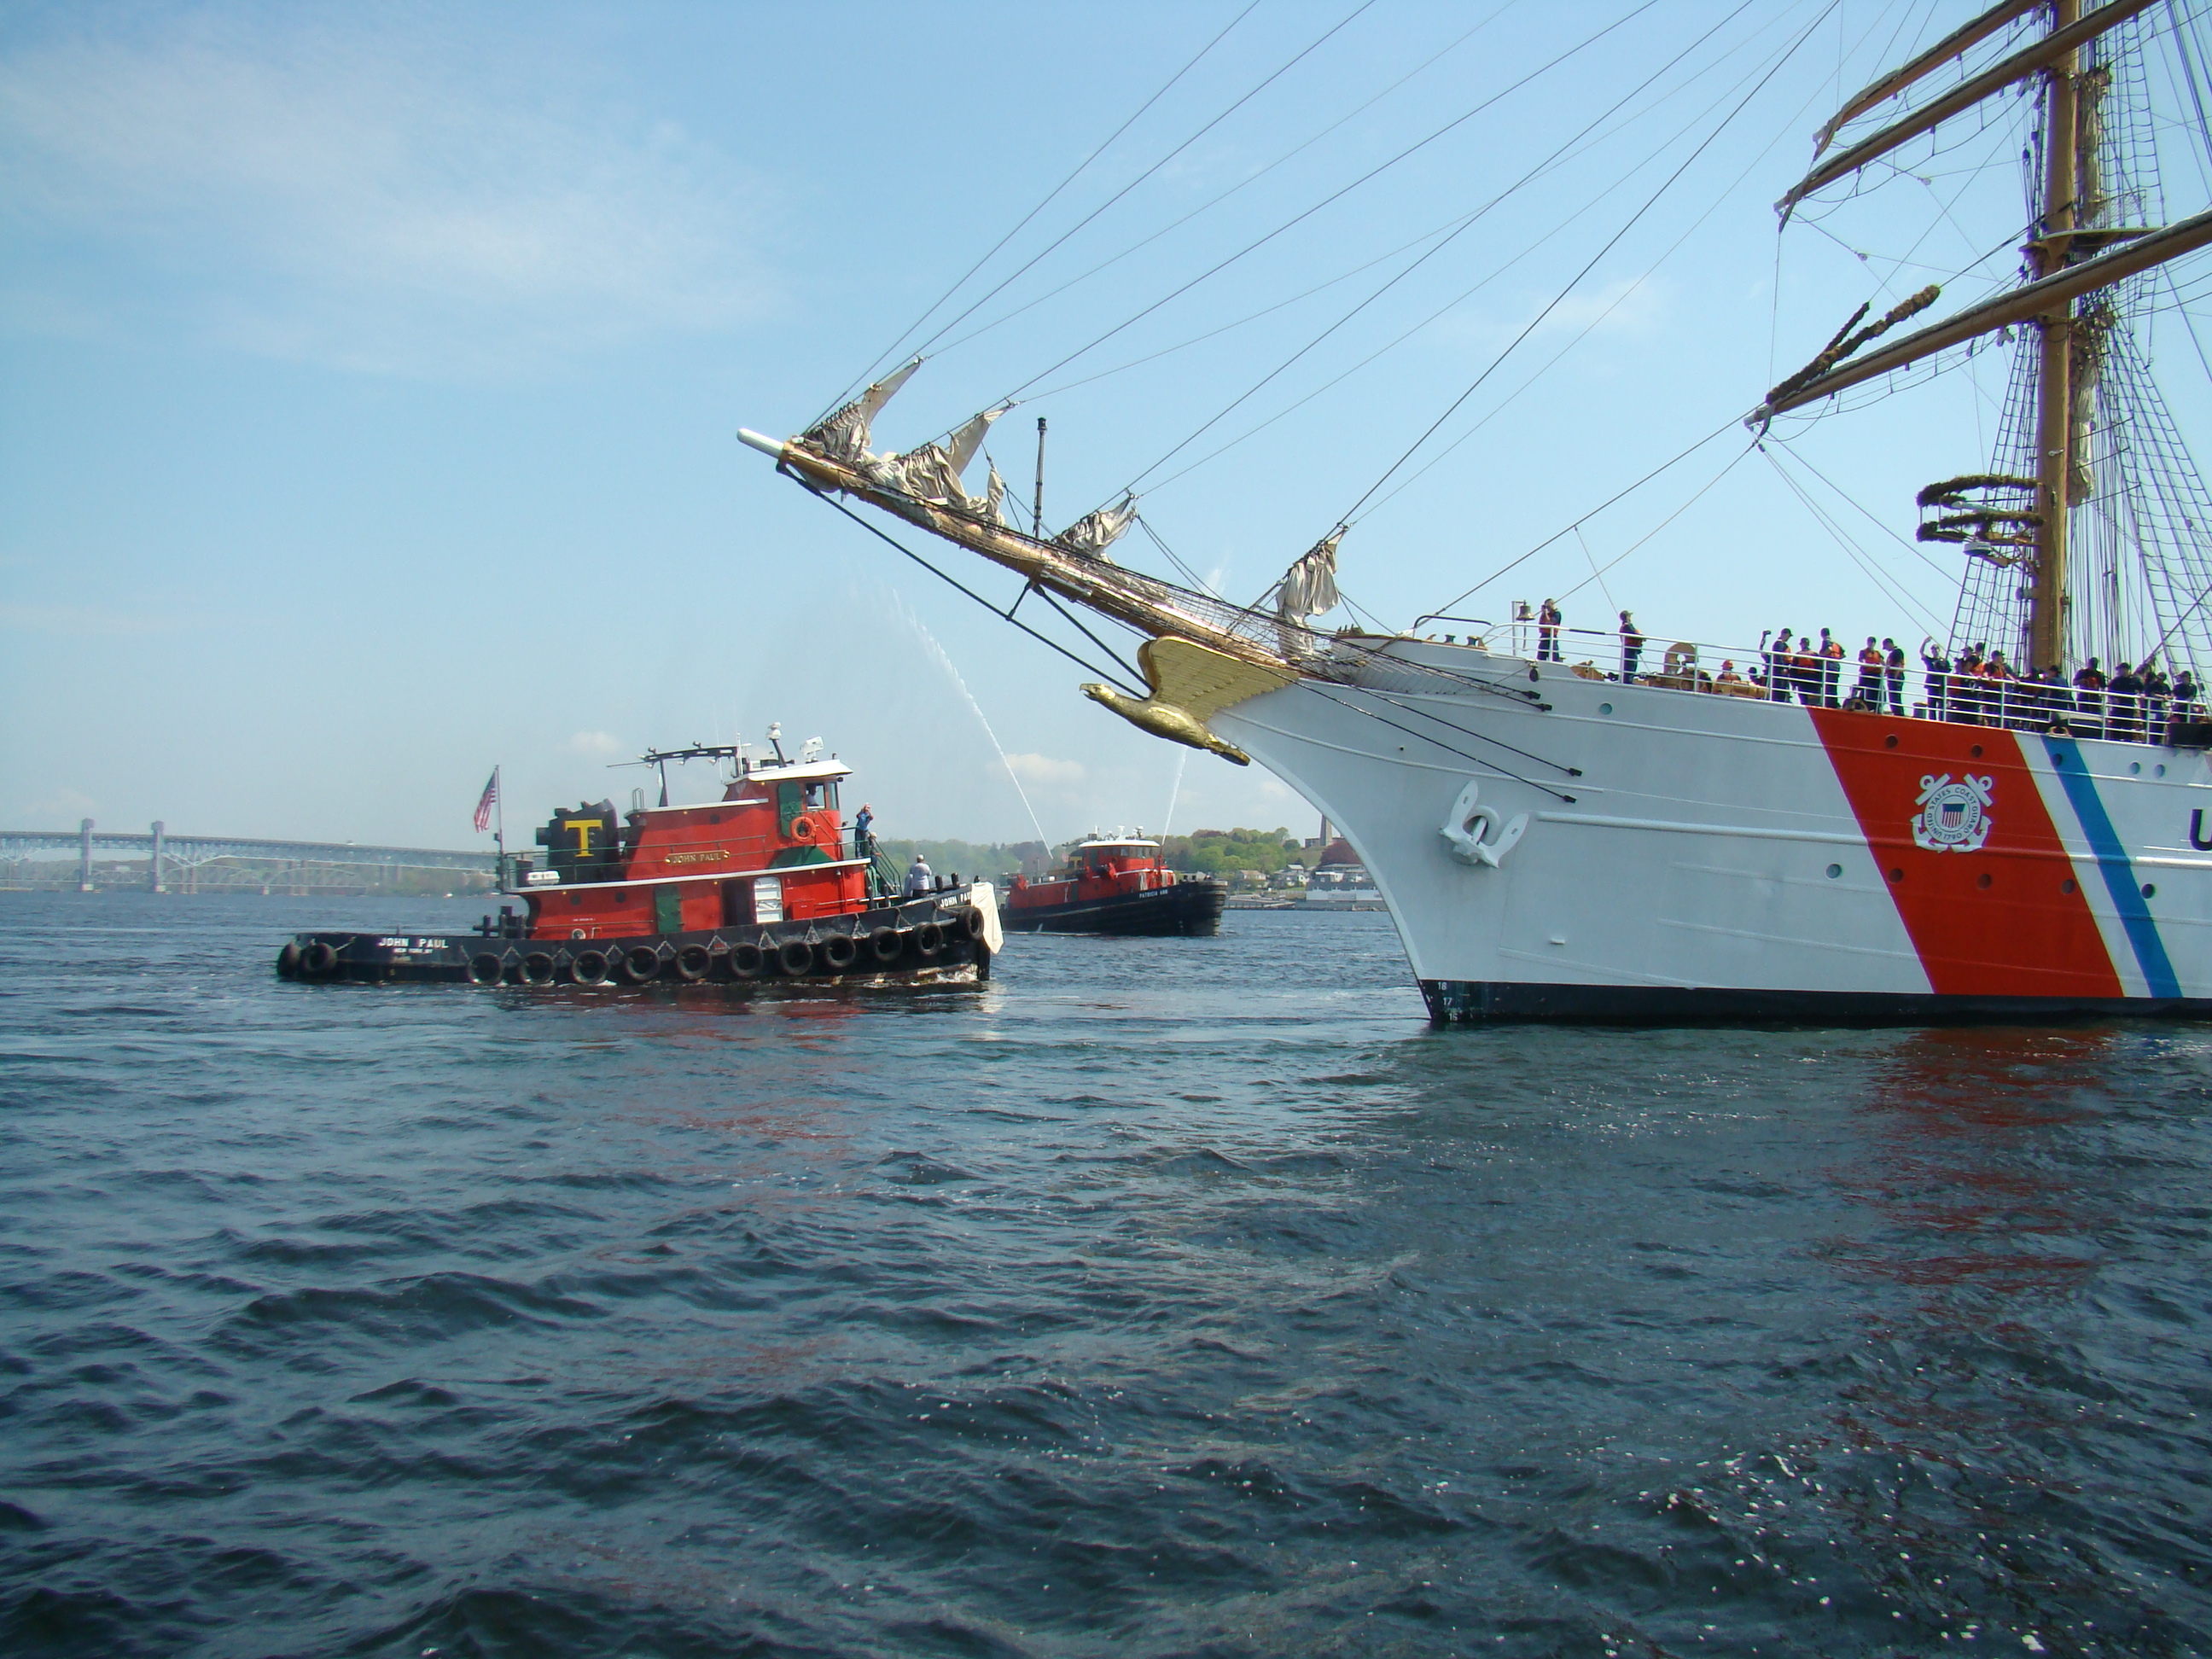 USCG Cutter Eagle departs on its 75th anniversary voyage to Europe